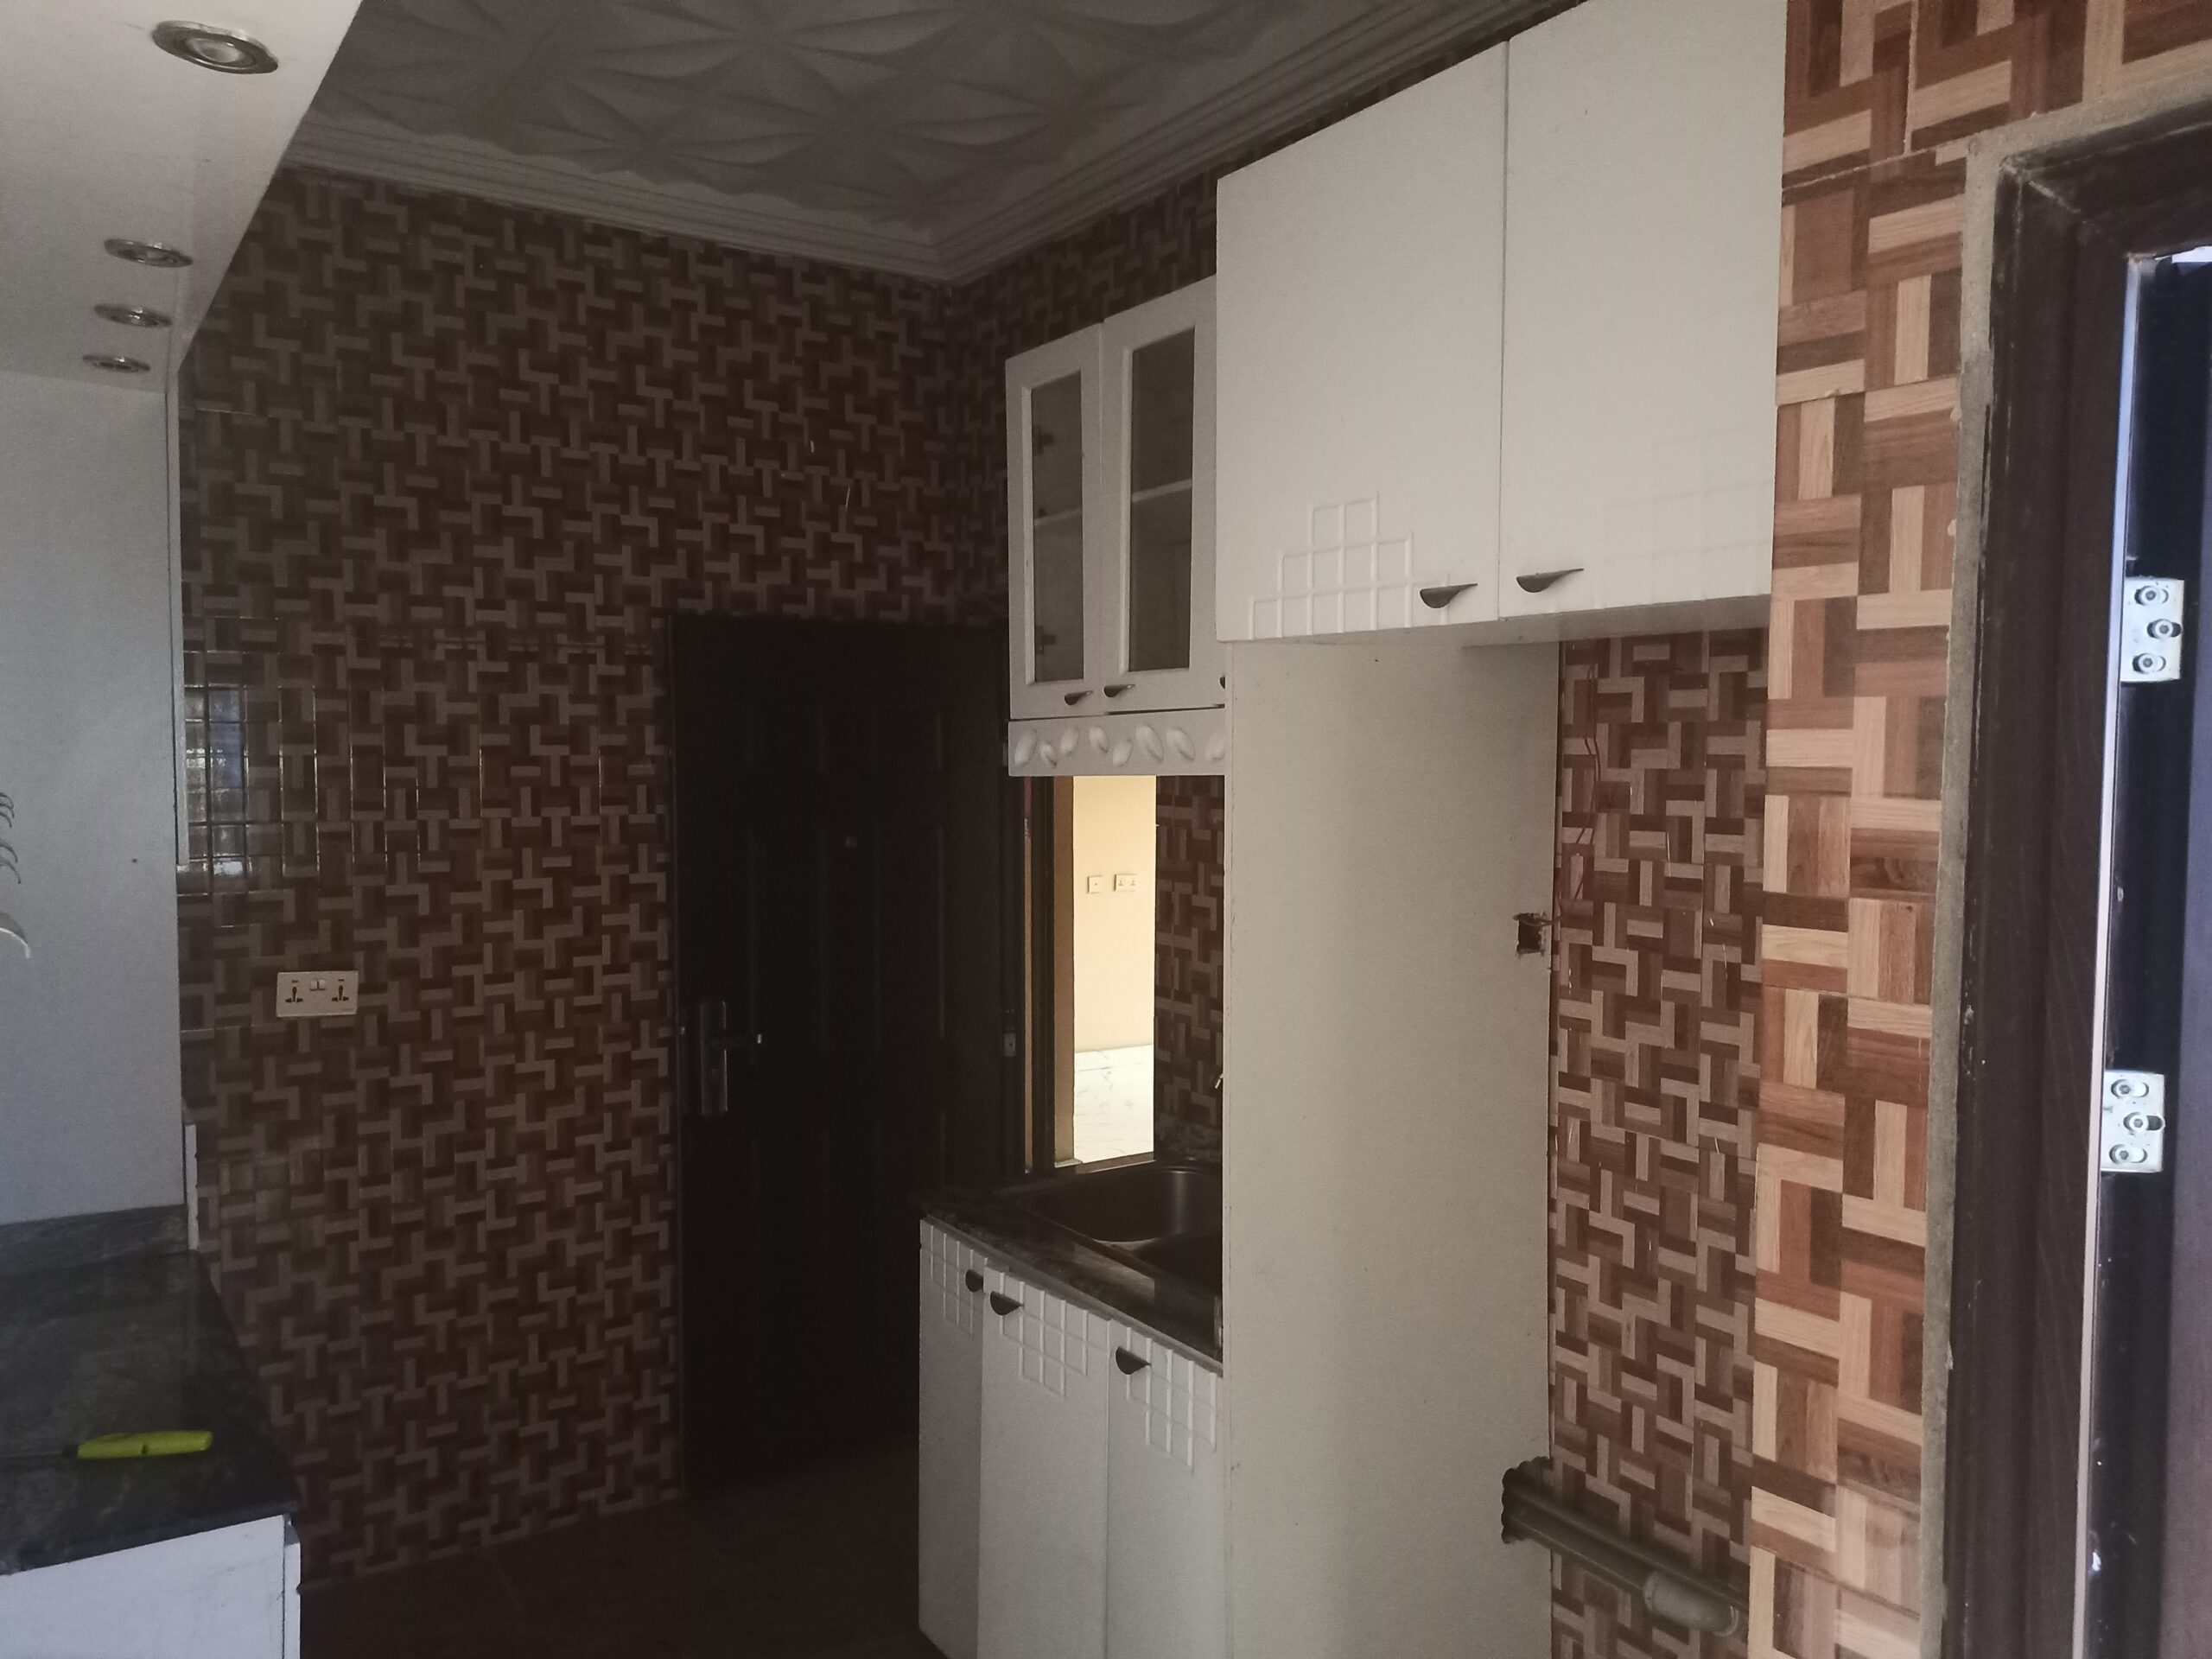 Detached 4 Bedroom All Ensuite Bungalow with Visitor’S Toilet